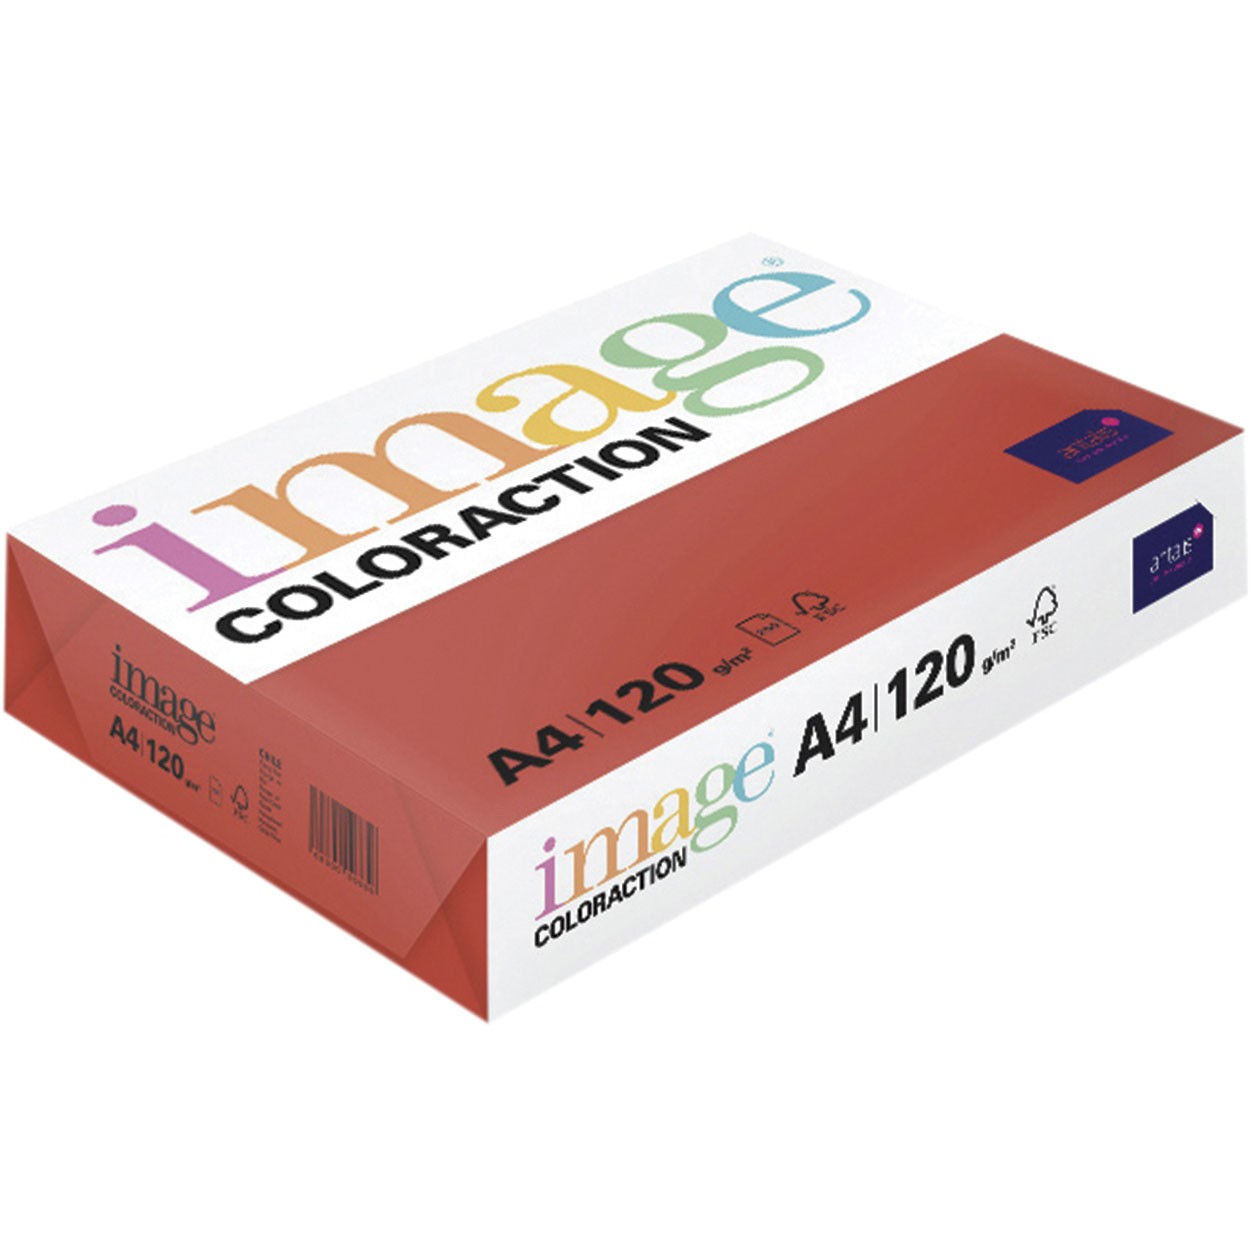 Image Coloraction A4 120g Coral Red Chile 250 ark